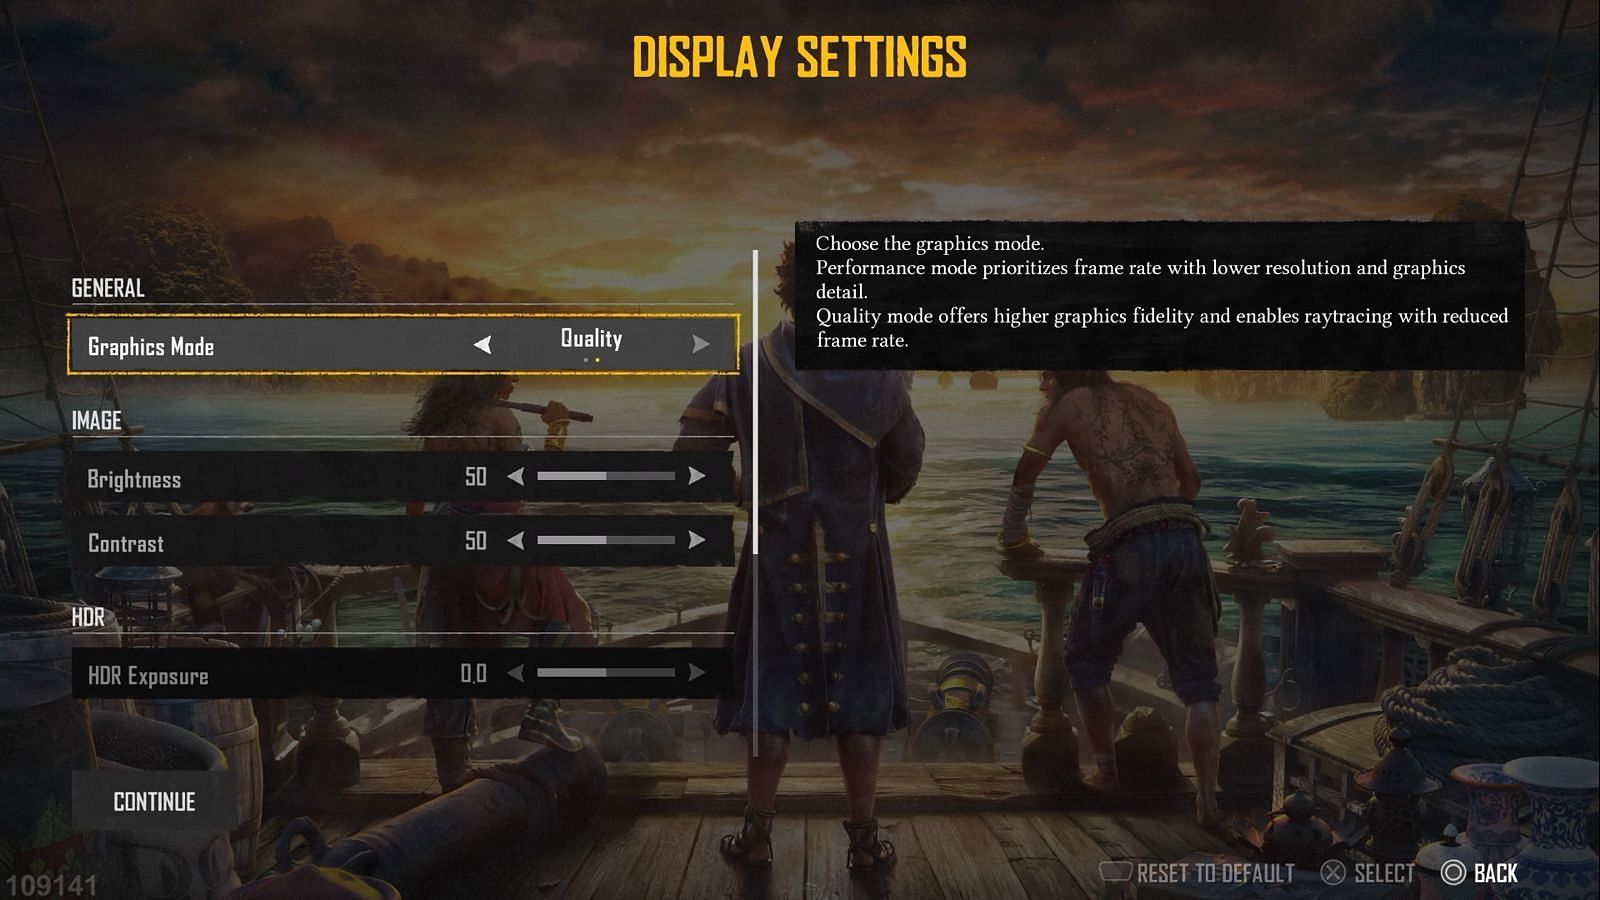 The best Skull and Bones settings for display and graphics (Image via Ubisoft)